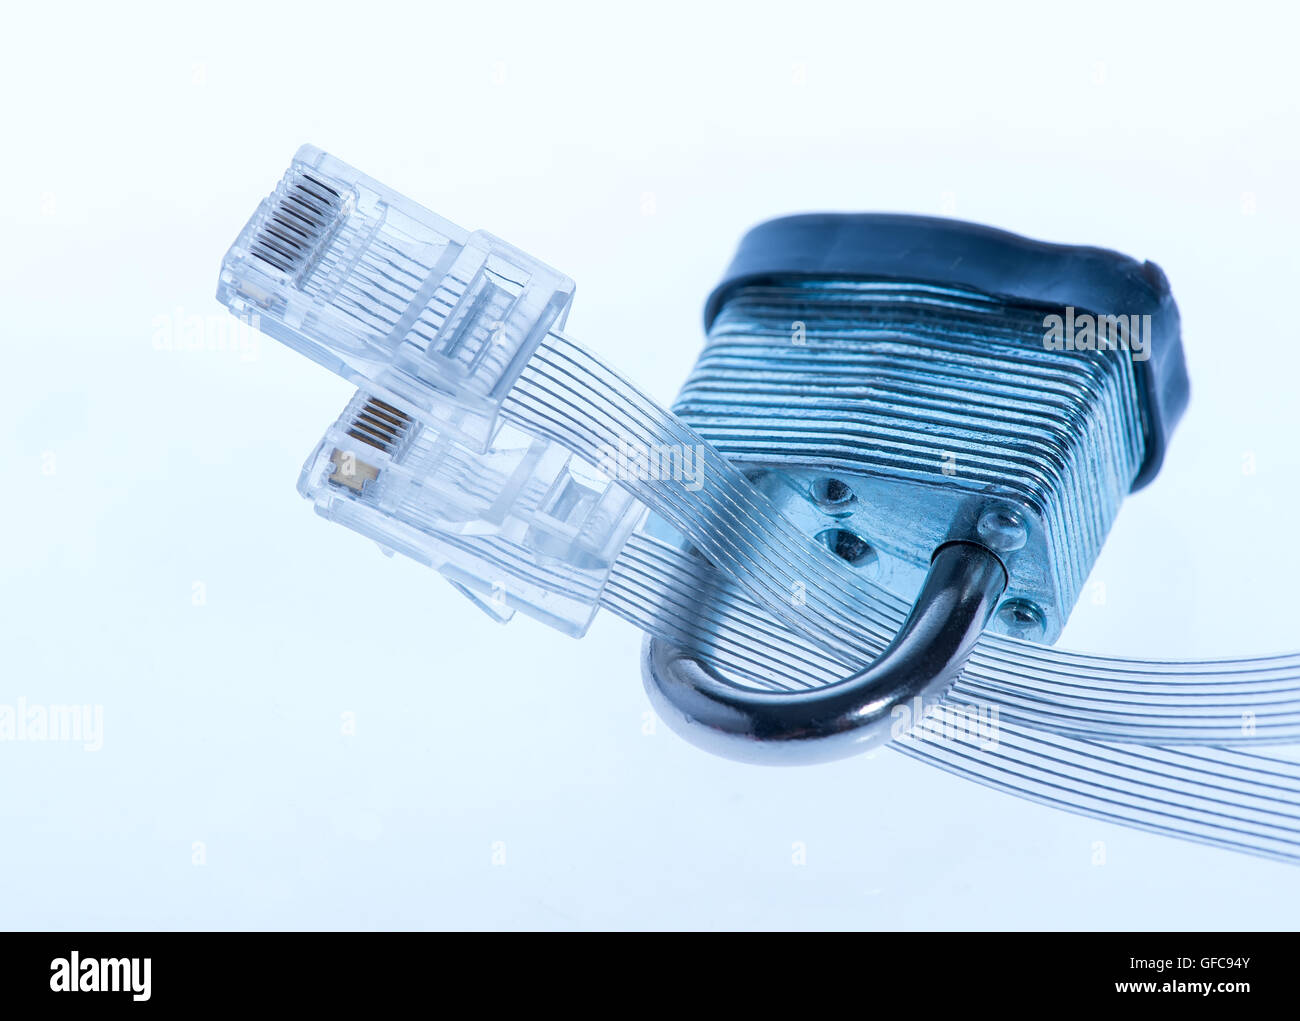 network and data protection concept with padlock and switch Stock Photo